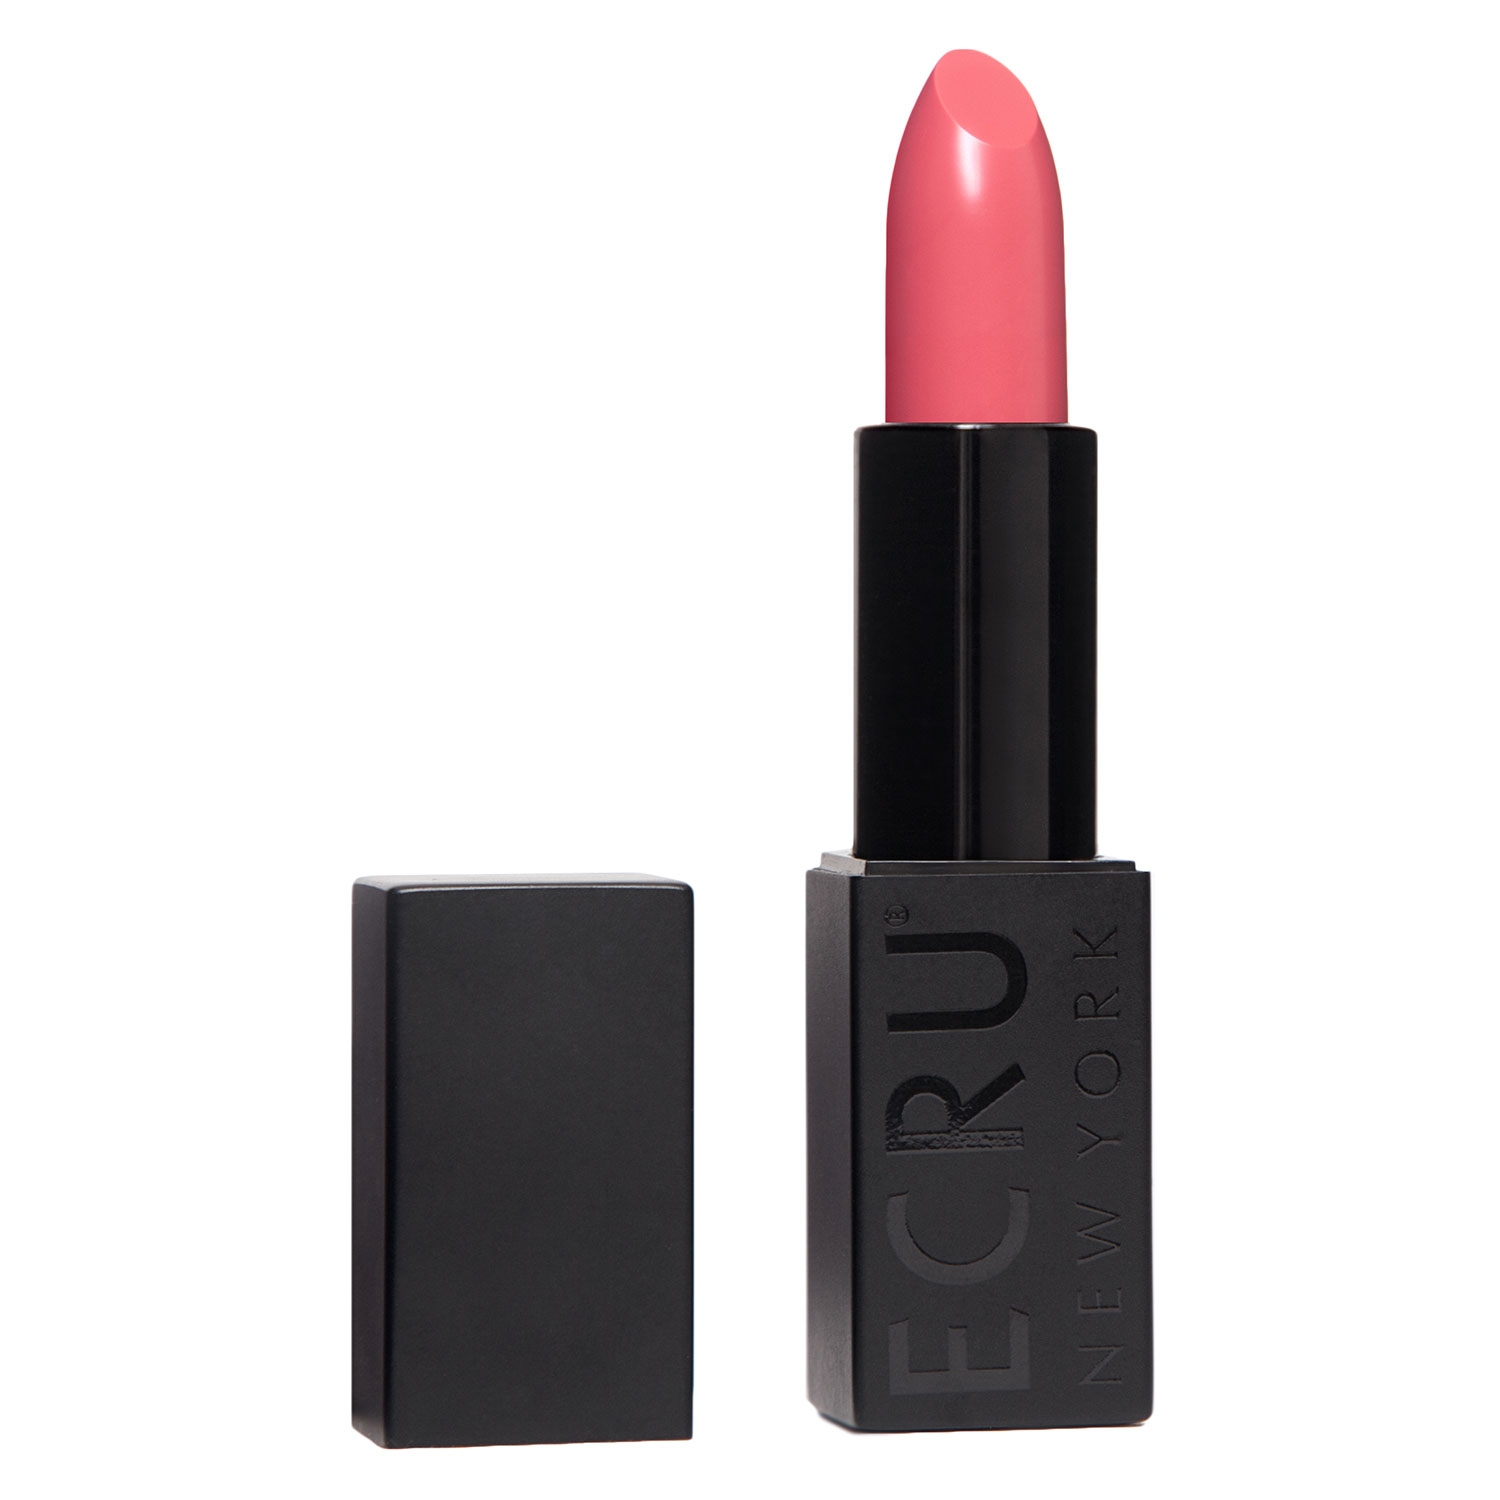 Product image from Ecru Beauty - VelvetAir Lipstick Sultry Coral